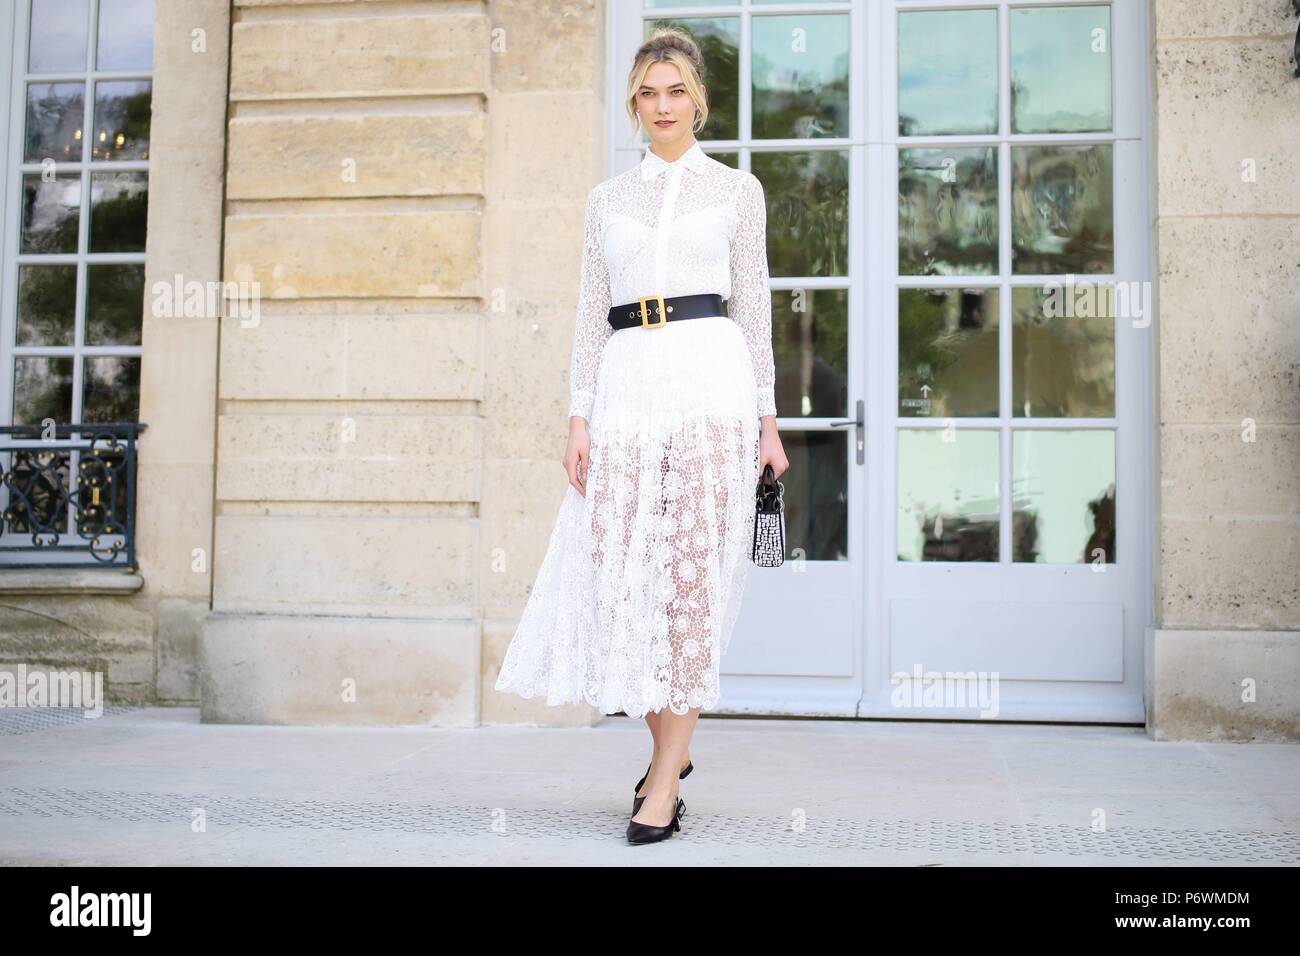 Model Karlie Kloss attending the Dior runway show during Haute Couture Fashion Week in Paris - July 2, 2018 - Photo: Runway Manhattan ***For Editorial Use Only*** | Verwendung weltweit Stock Photo